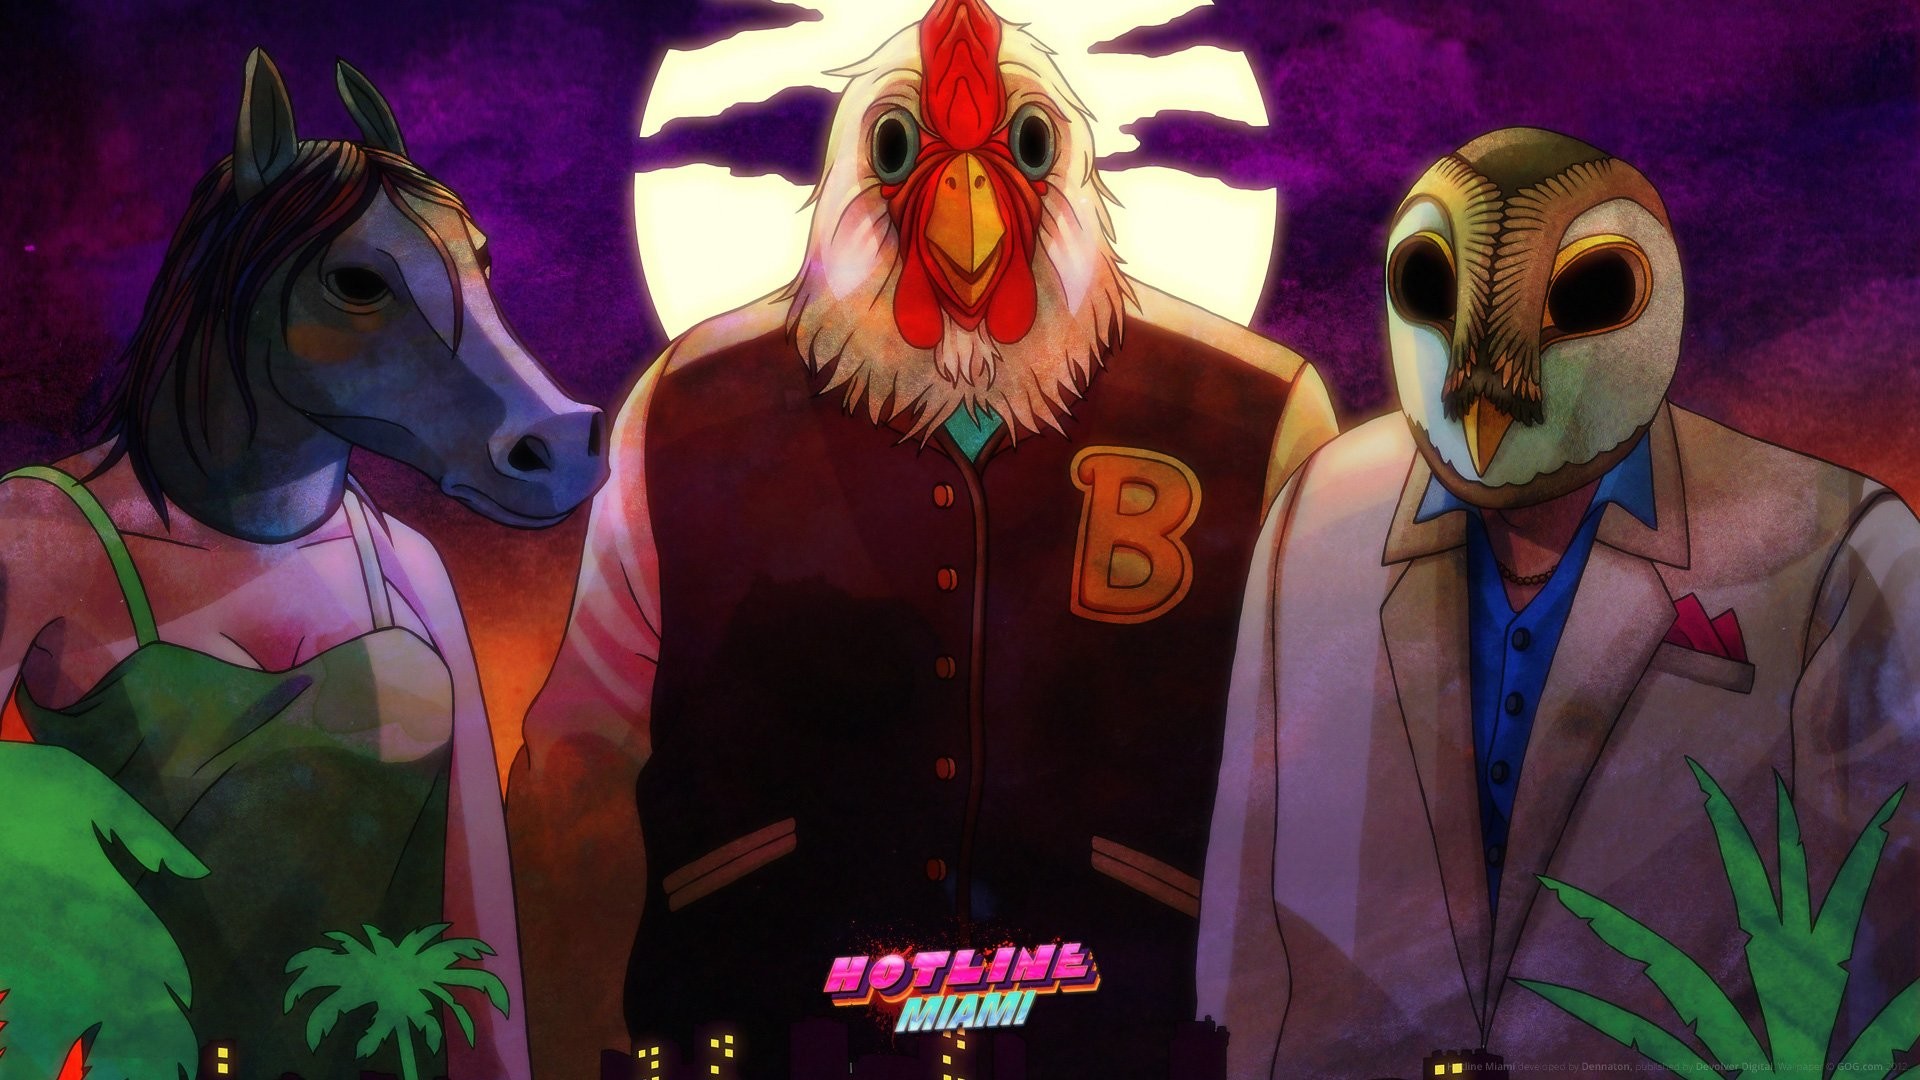 1920x1080 'Hotline Miami' takes players on an acid trip into a realm of depravity  Indie Express